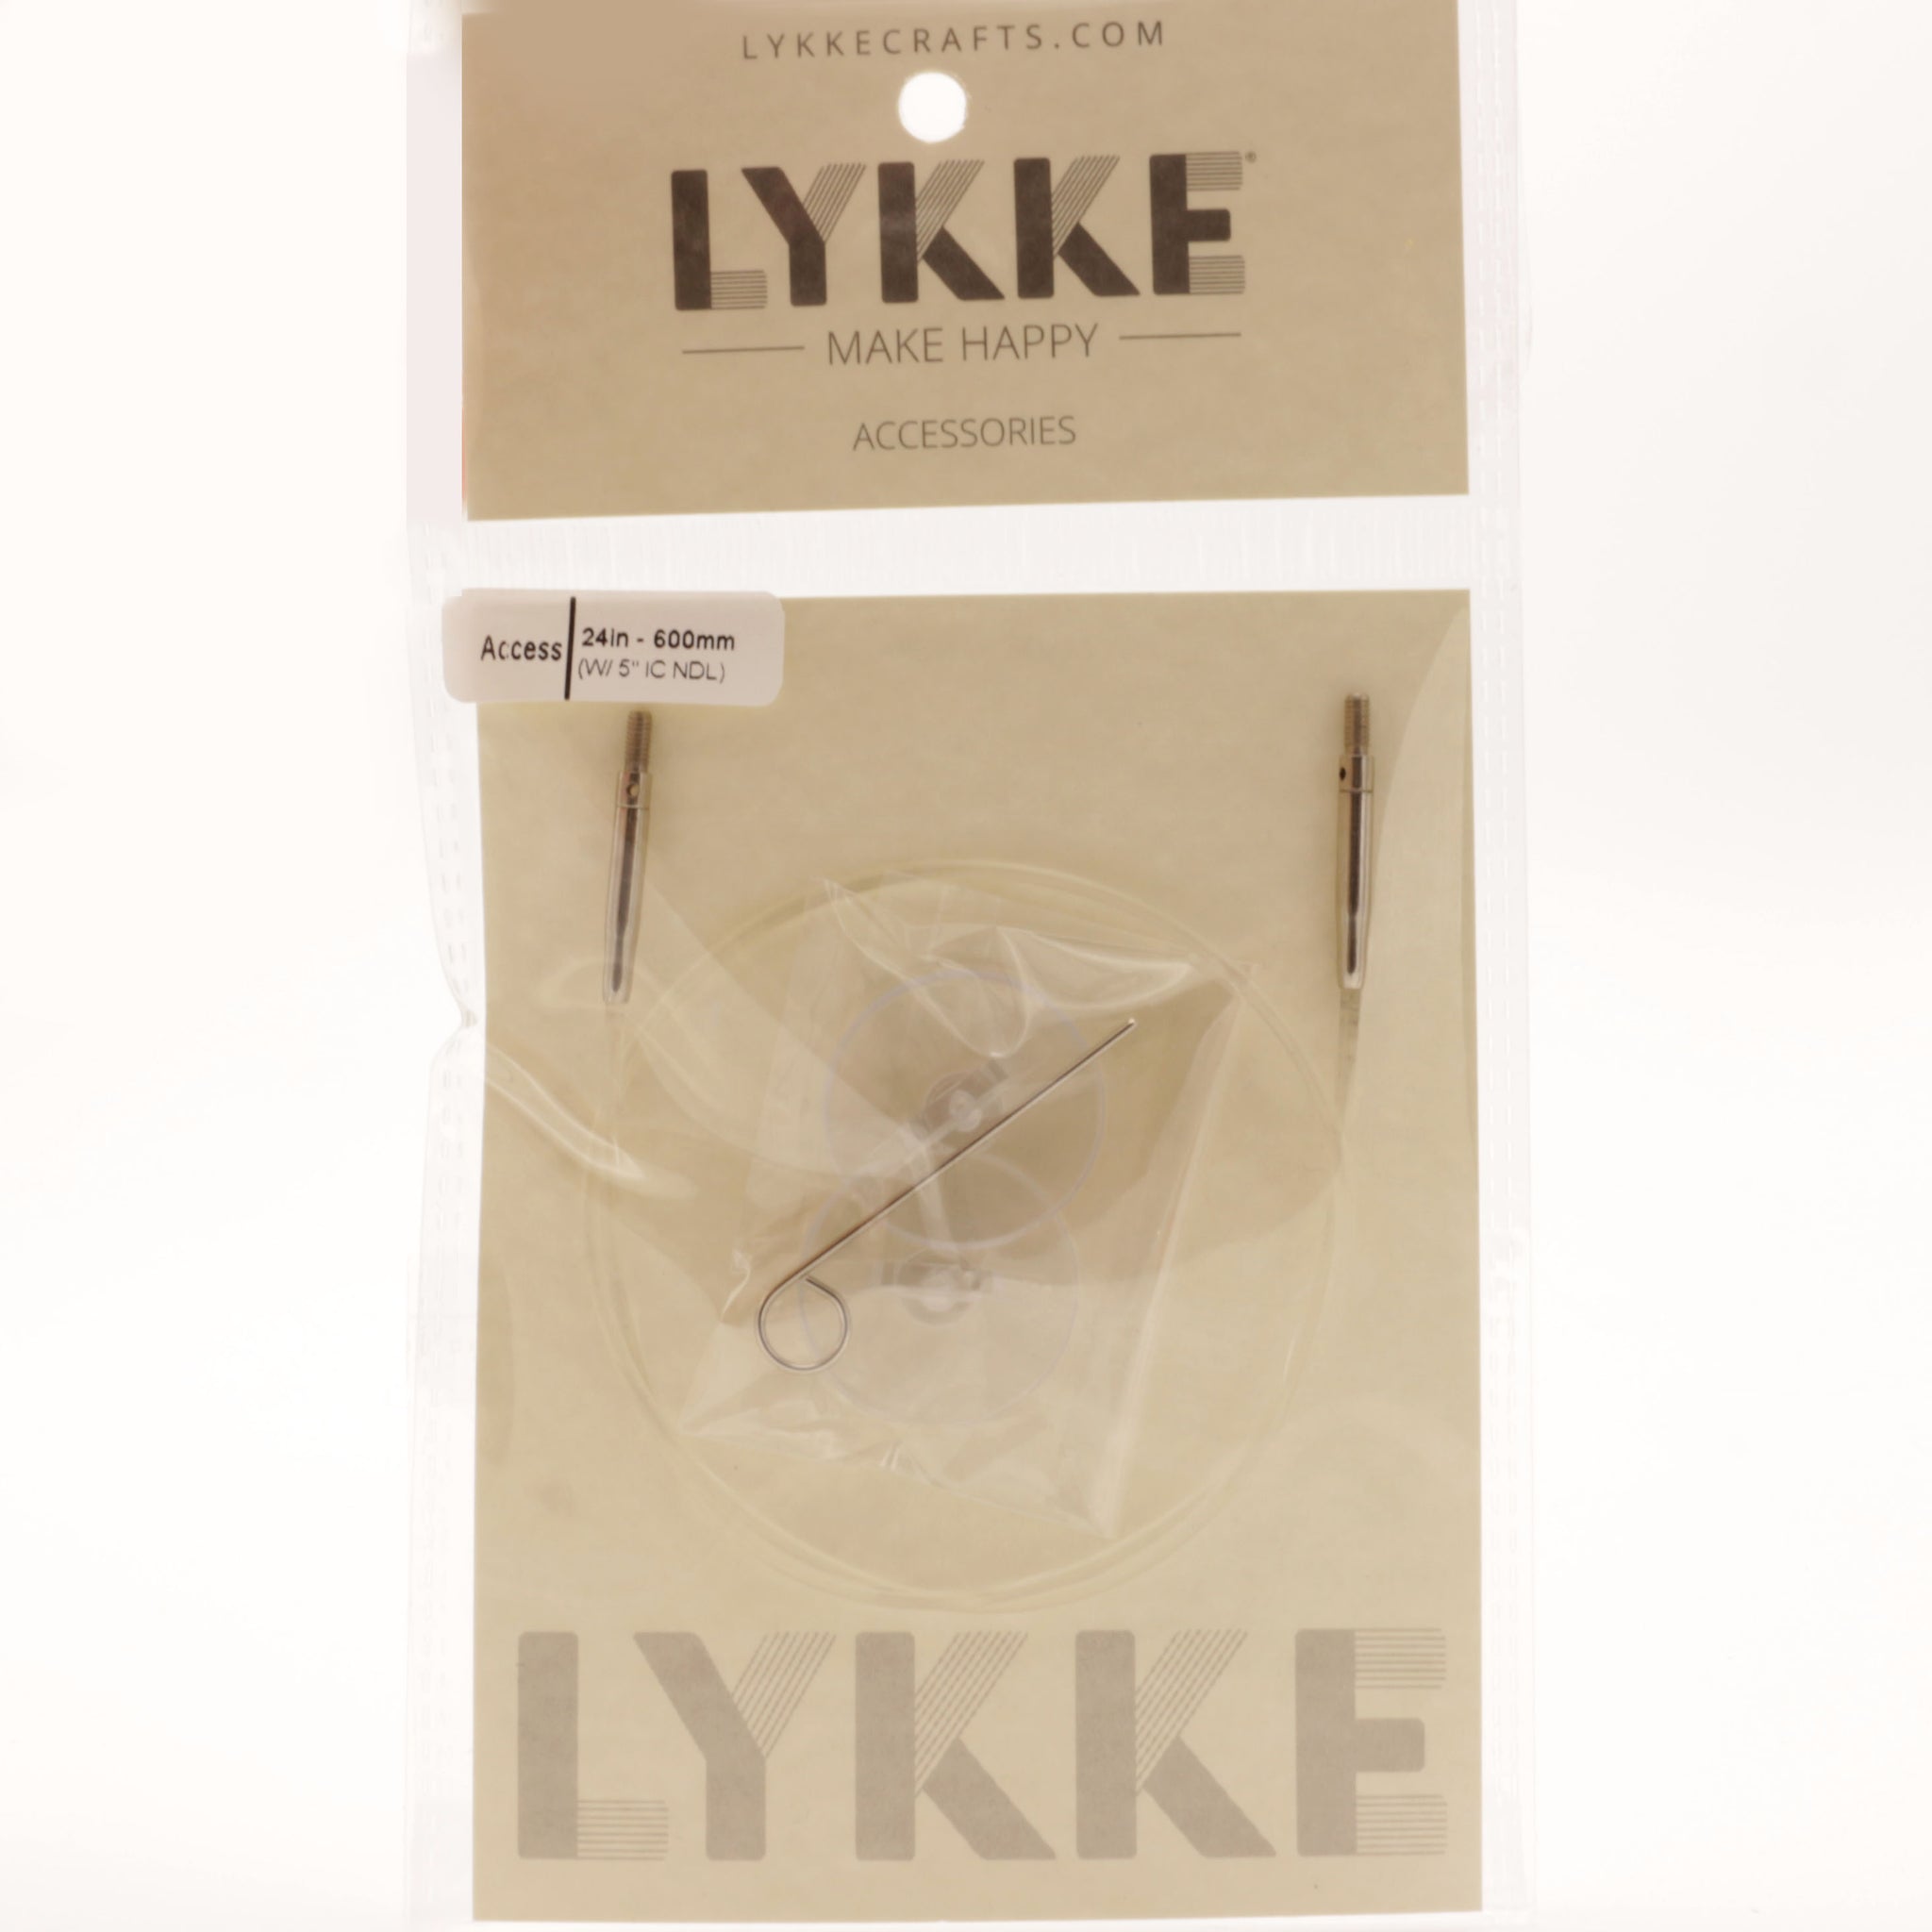 Lykke Interchangeable Needle Cables at WEBS